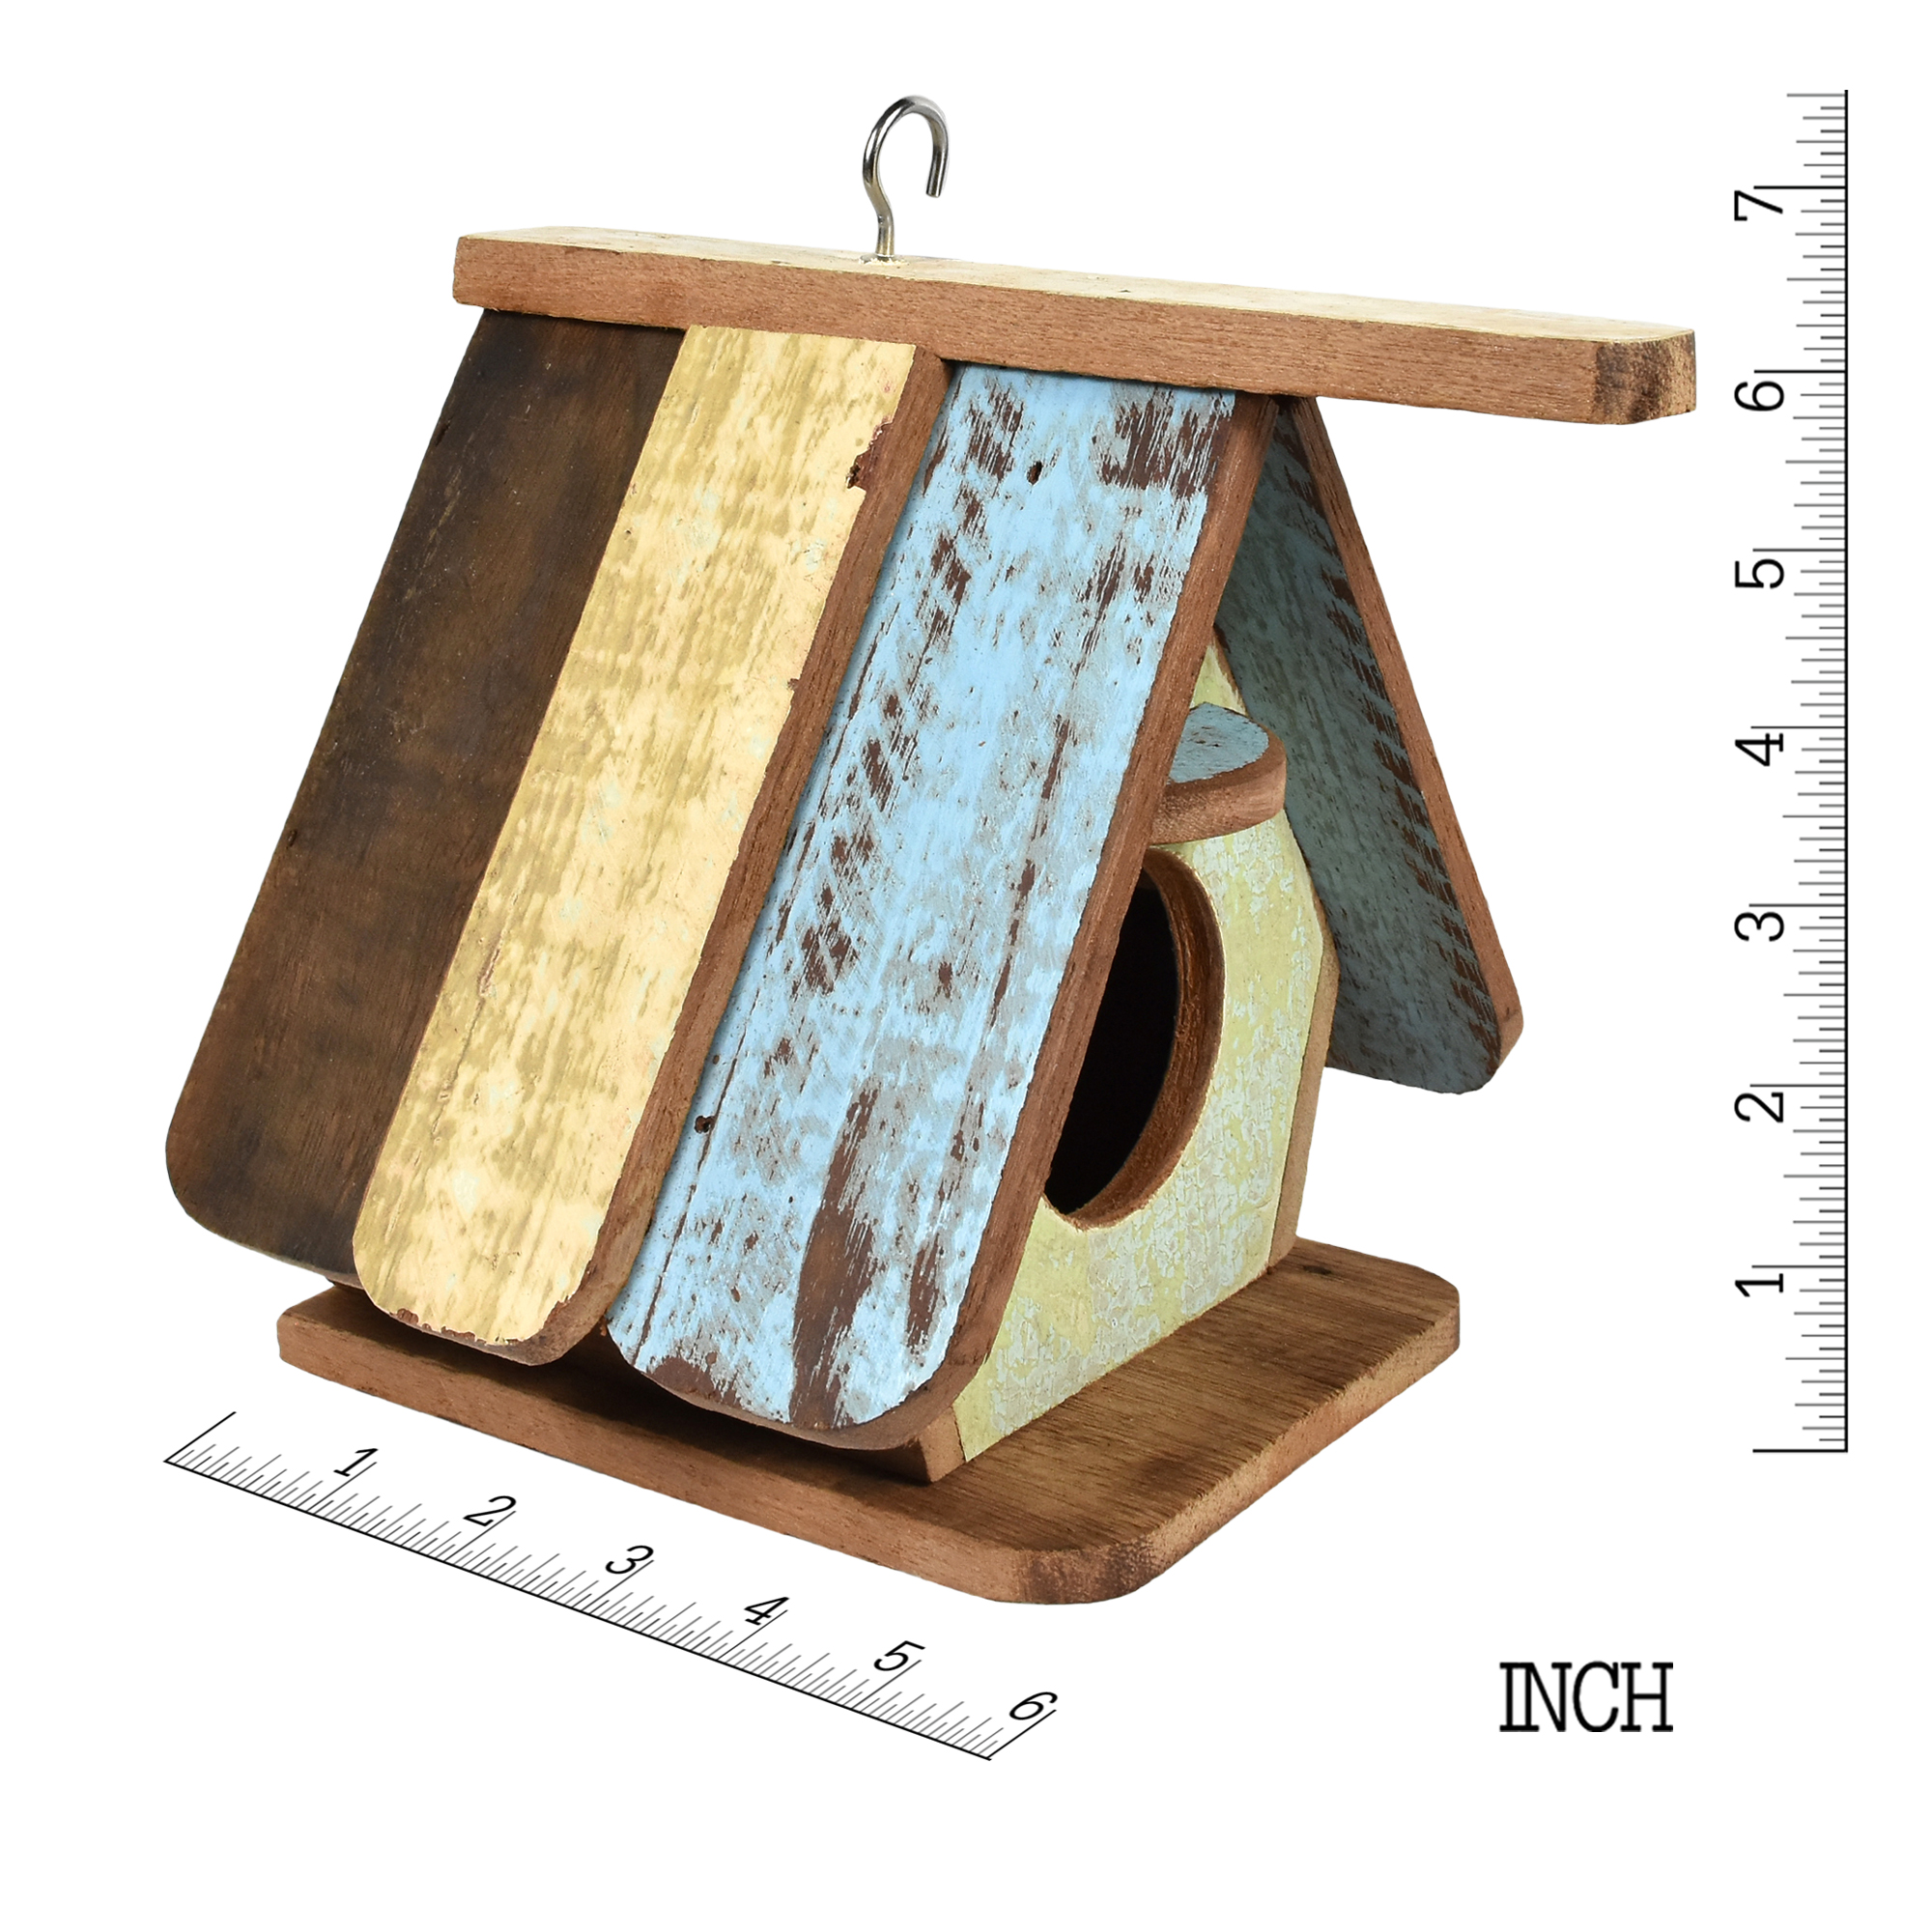 Handcrafted Pastel Bird House Wood Hanging Decor - image 3 of 5